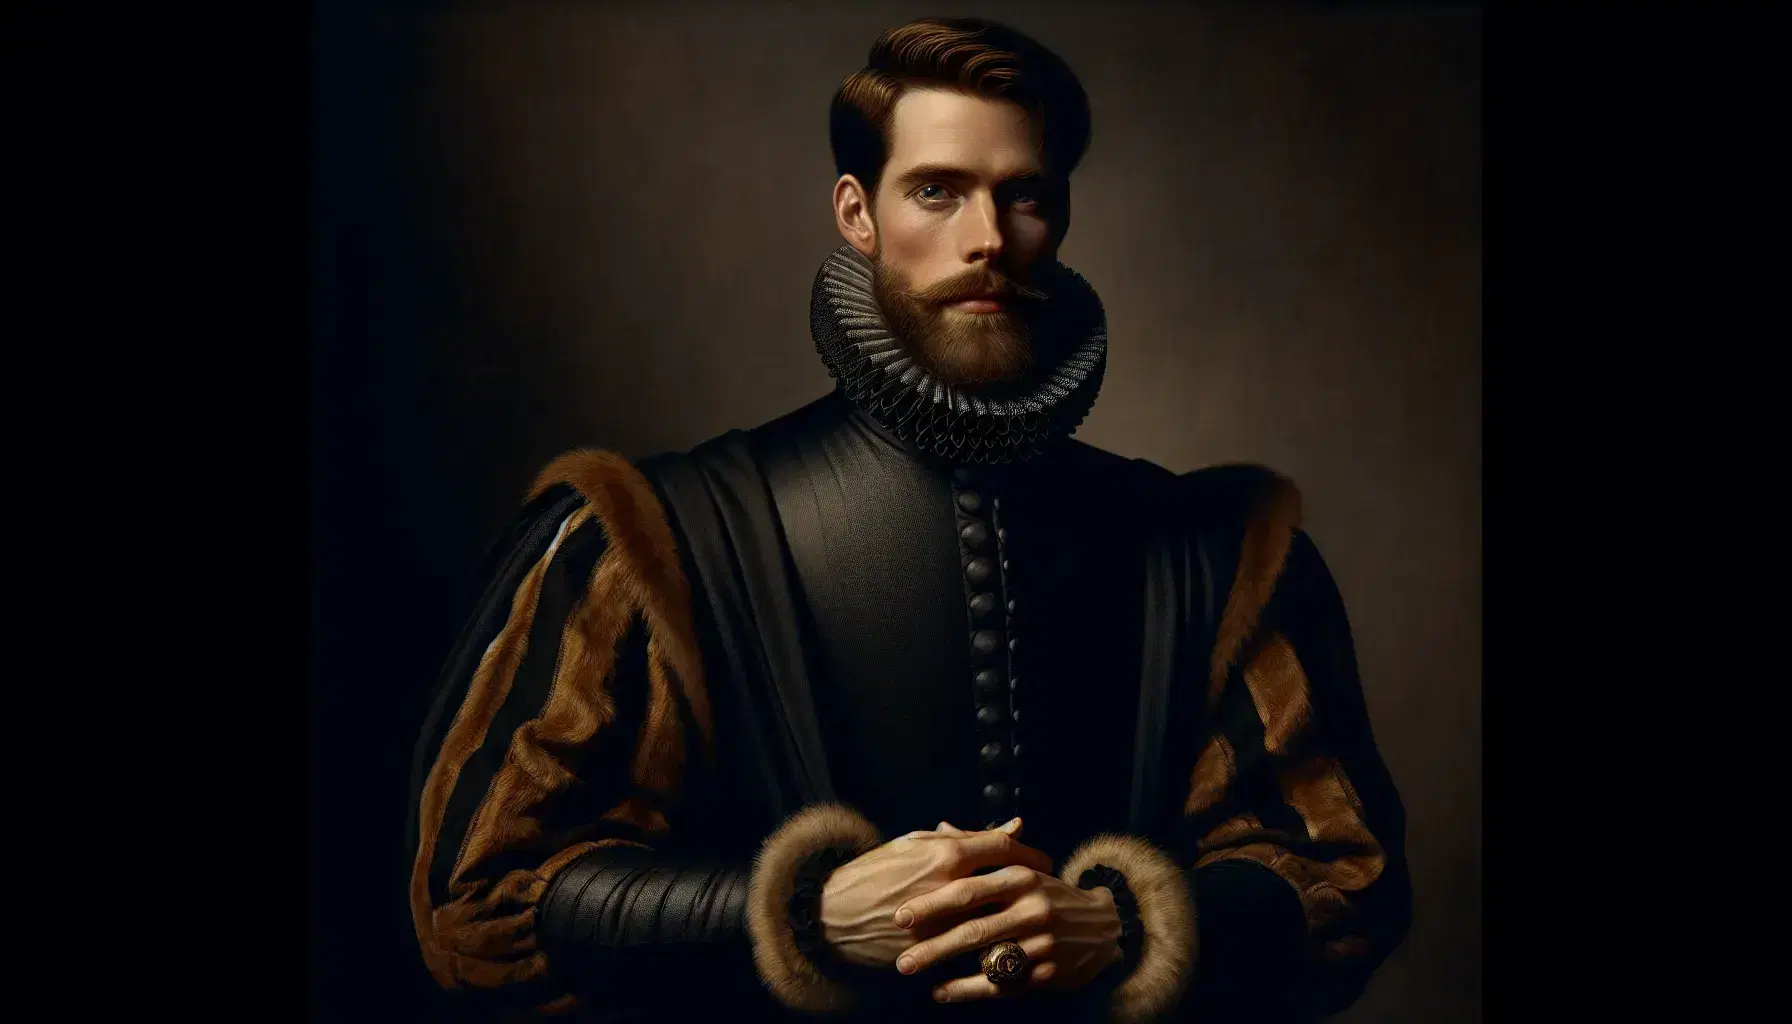 16th-century English nobleman in black doublet and fur-lined robe, gold ring on finger, set against a dark Tudor-era interior backdrop.